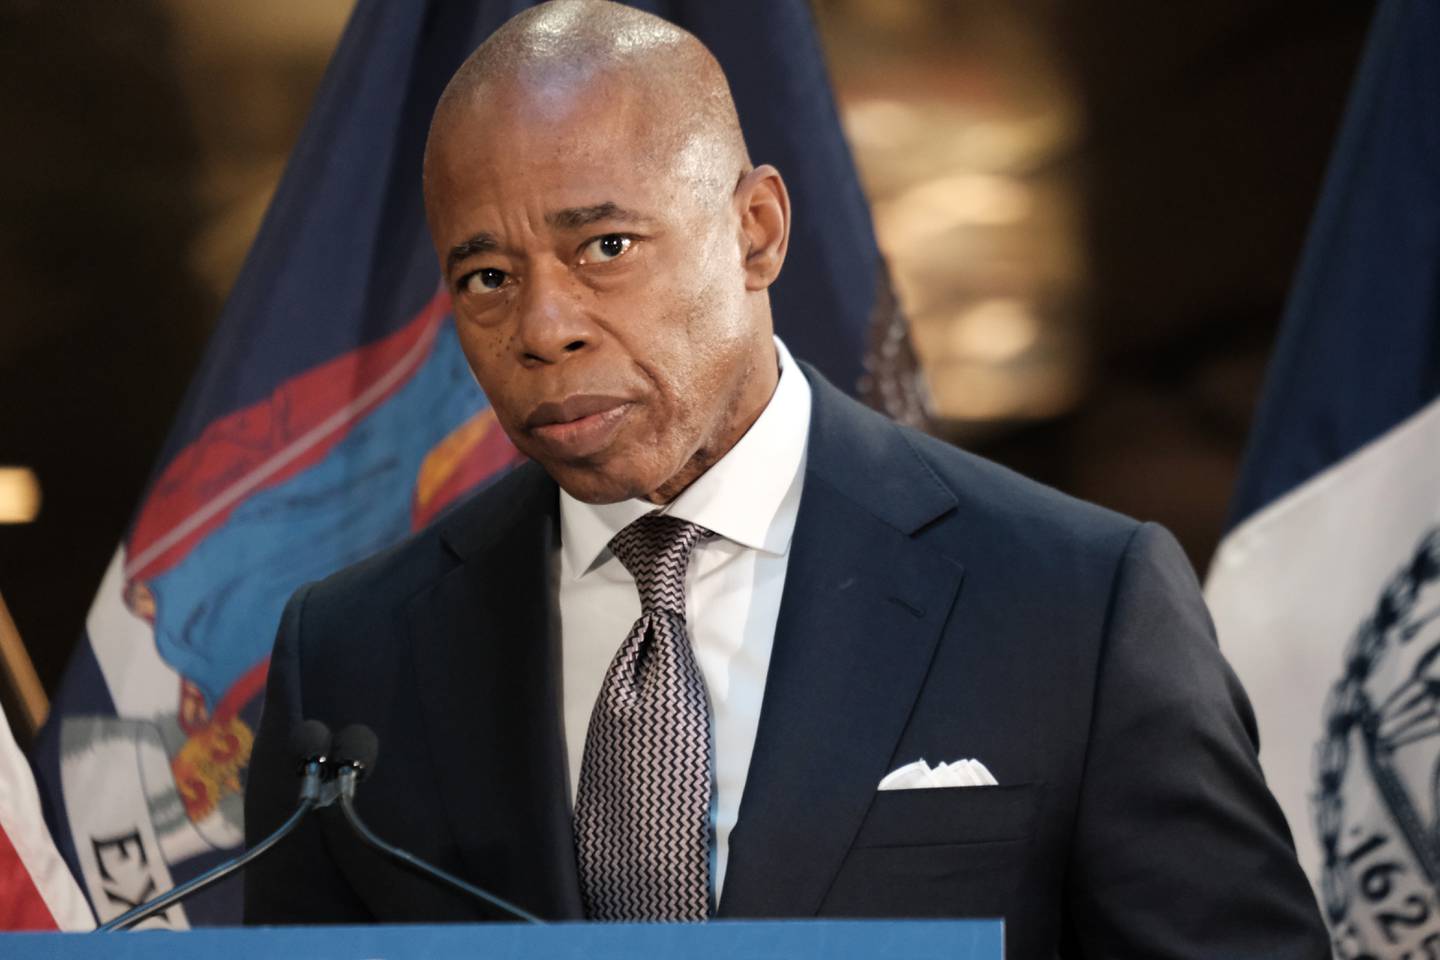 New York City Mayor Eric Adams speaks during a press conference in Manhattan, New York on January 6, 2022.